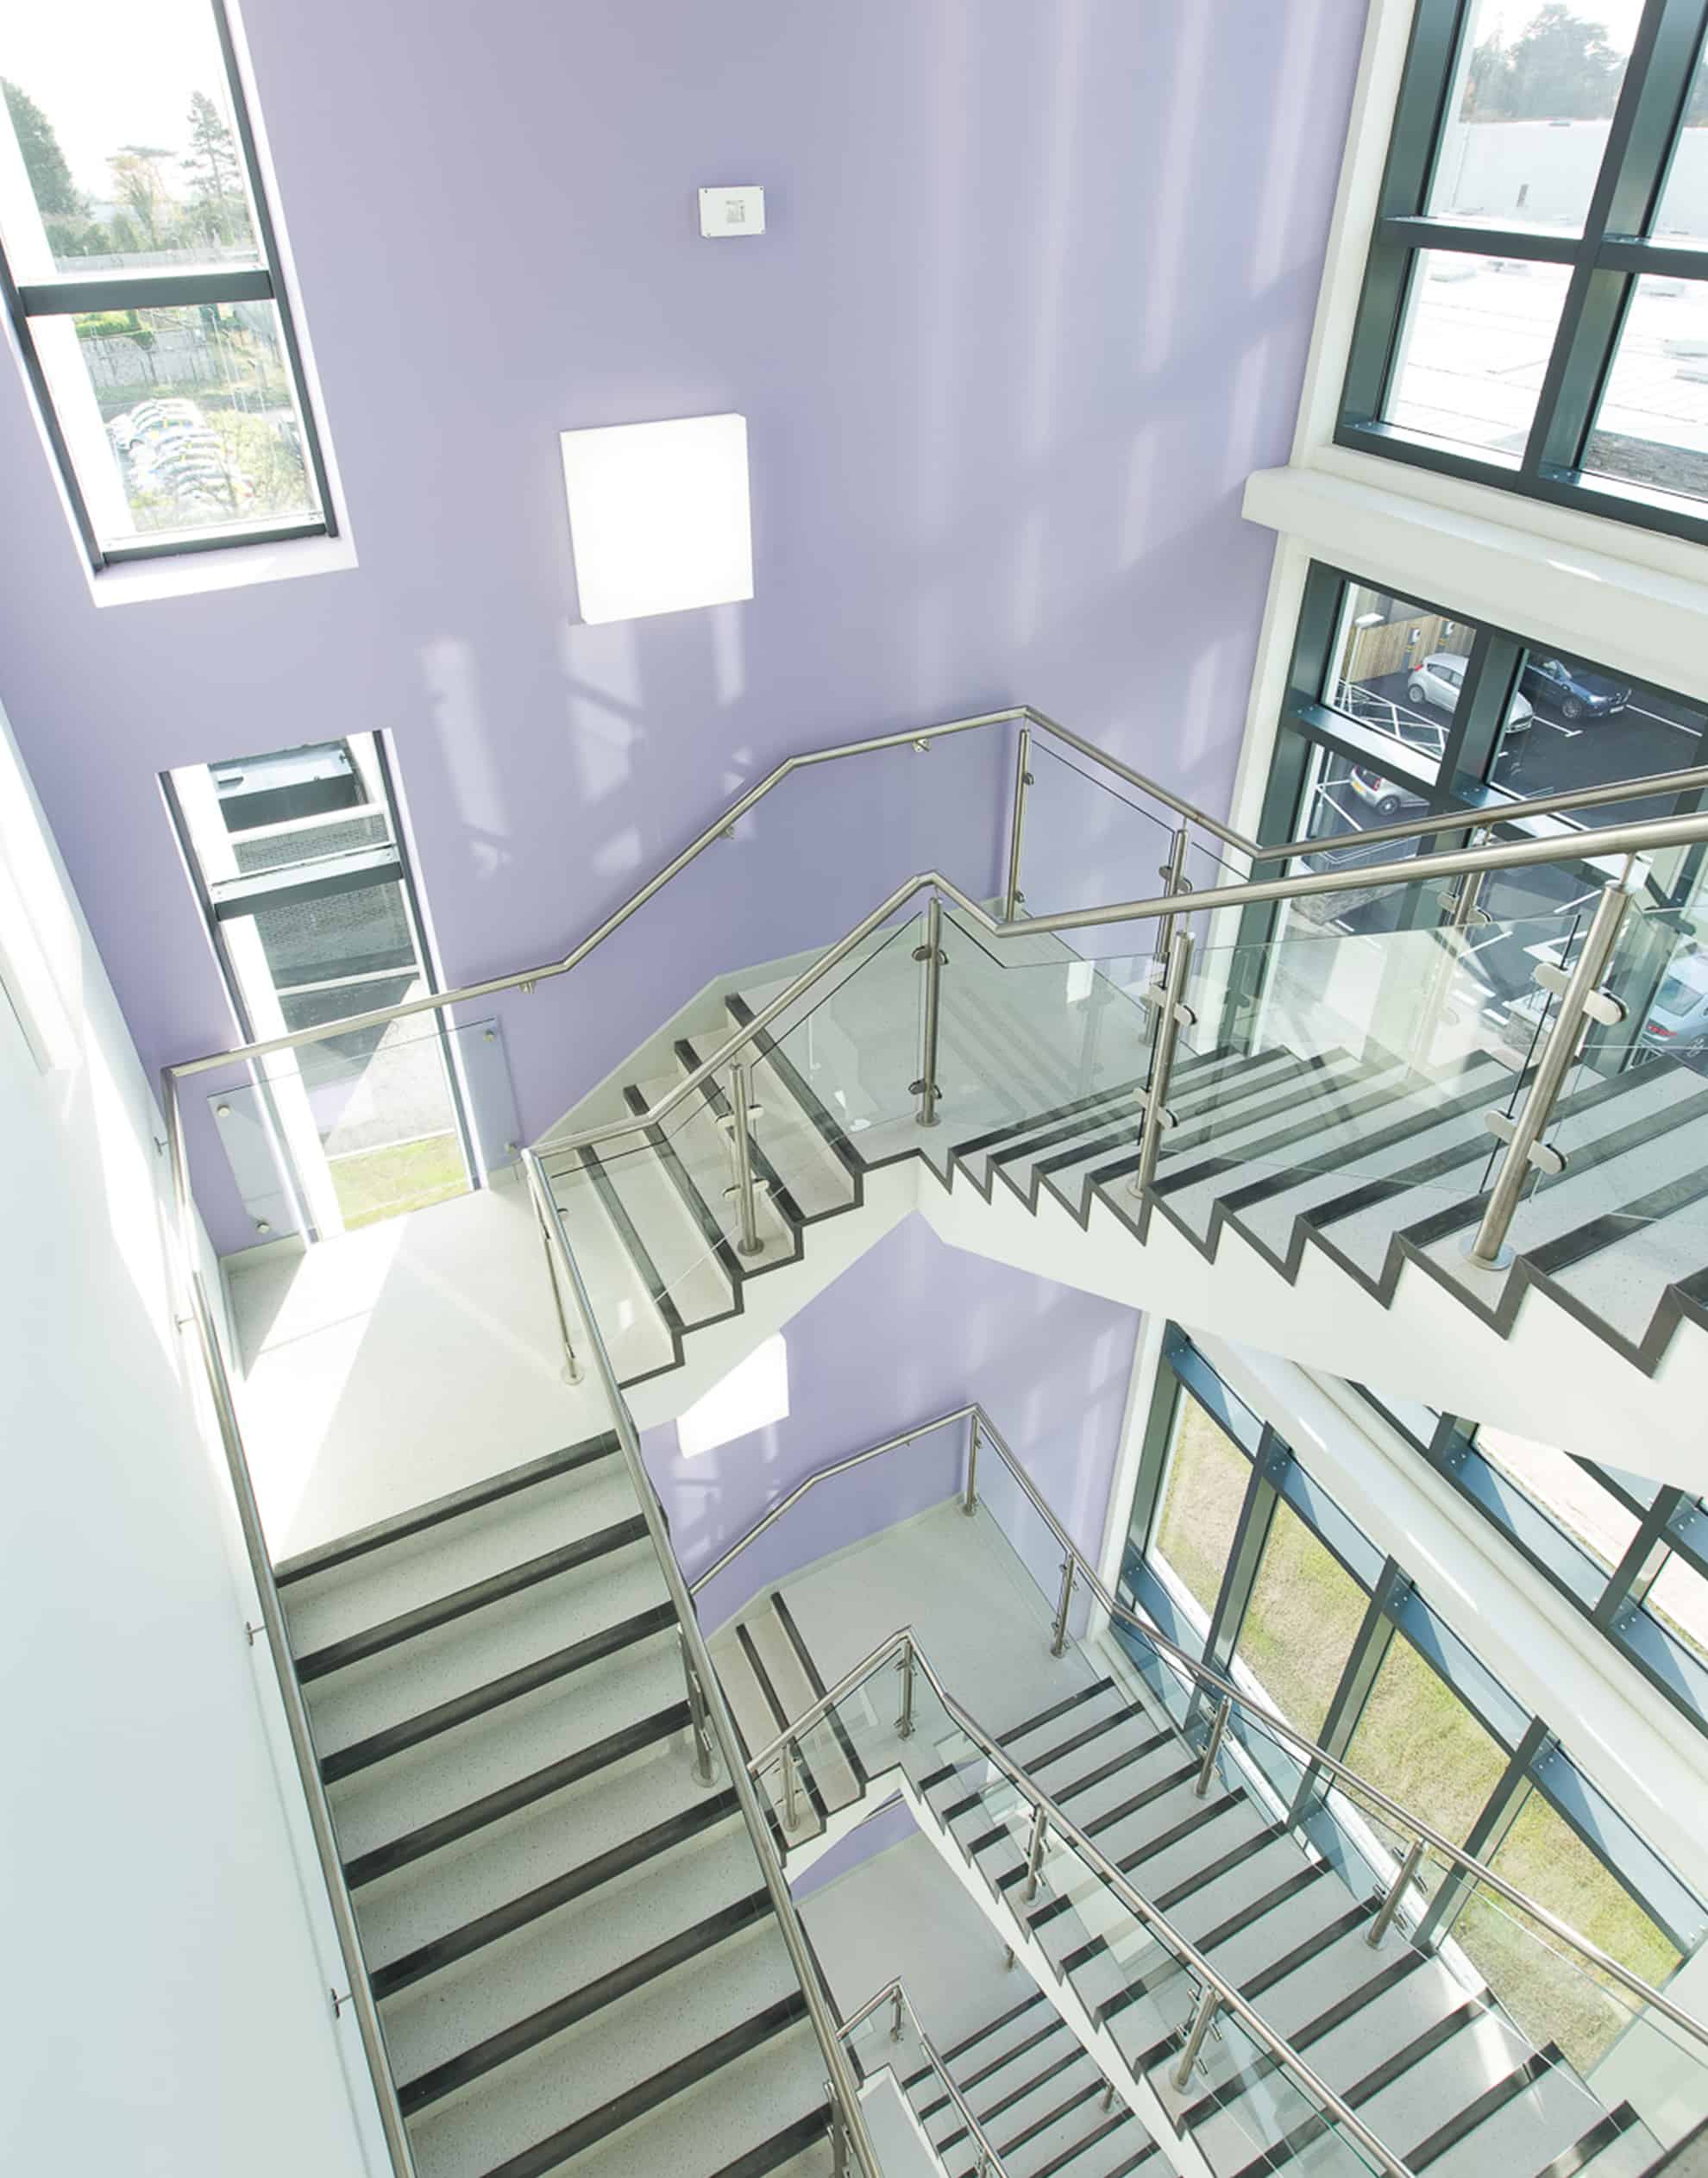 Northern Ireland Forensic Science Laboratory Staircase Photograph